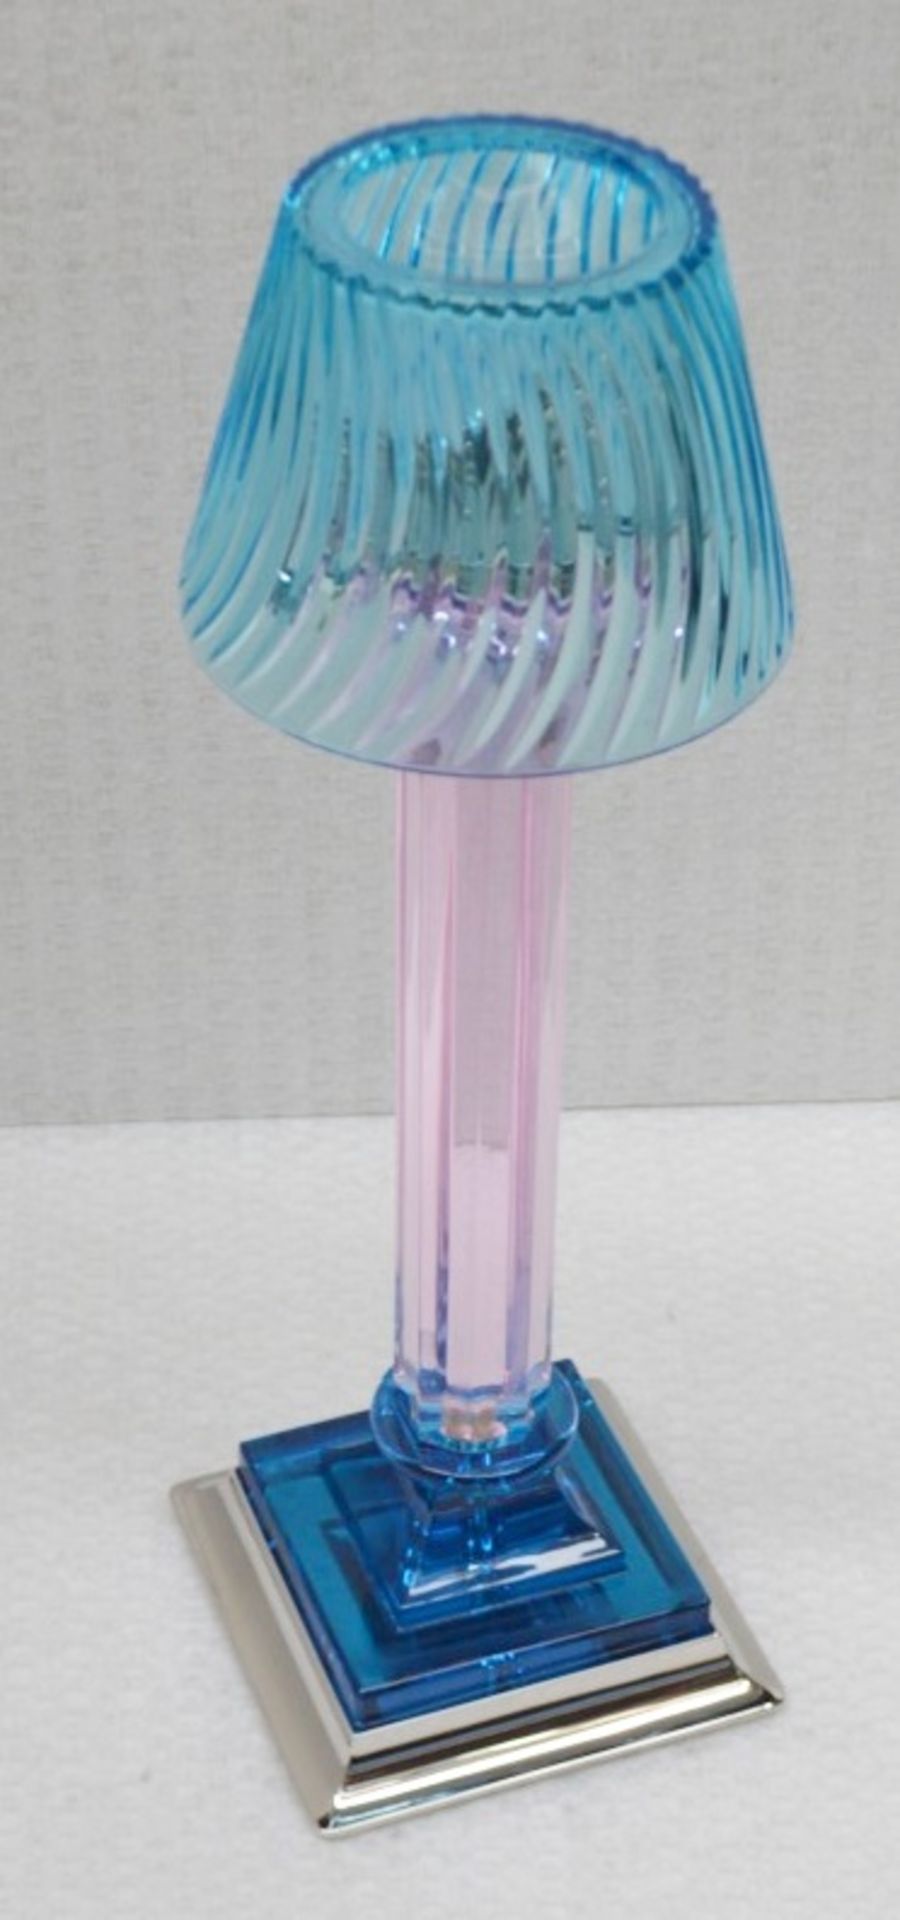 1 x BALDI 'Home Jewels' Italian Hand-crafted Artisan Candle Stick In Blue & Pink Crystal, With